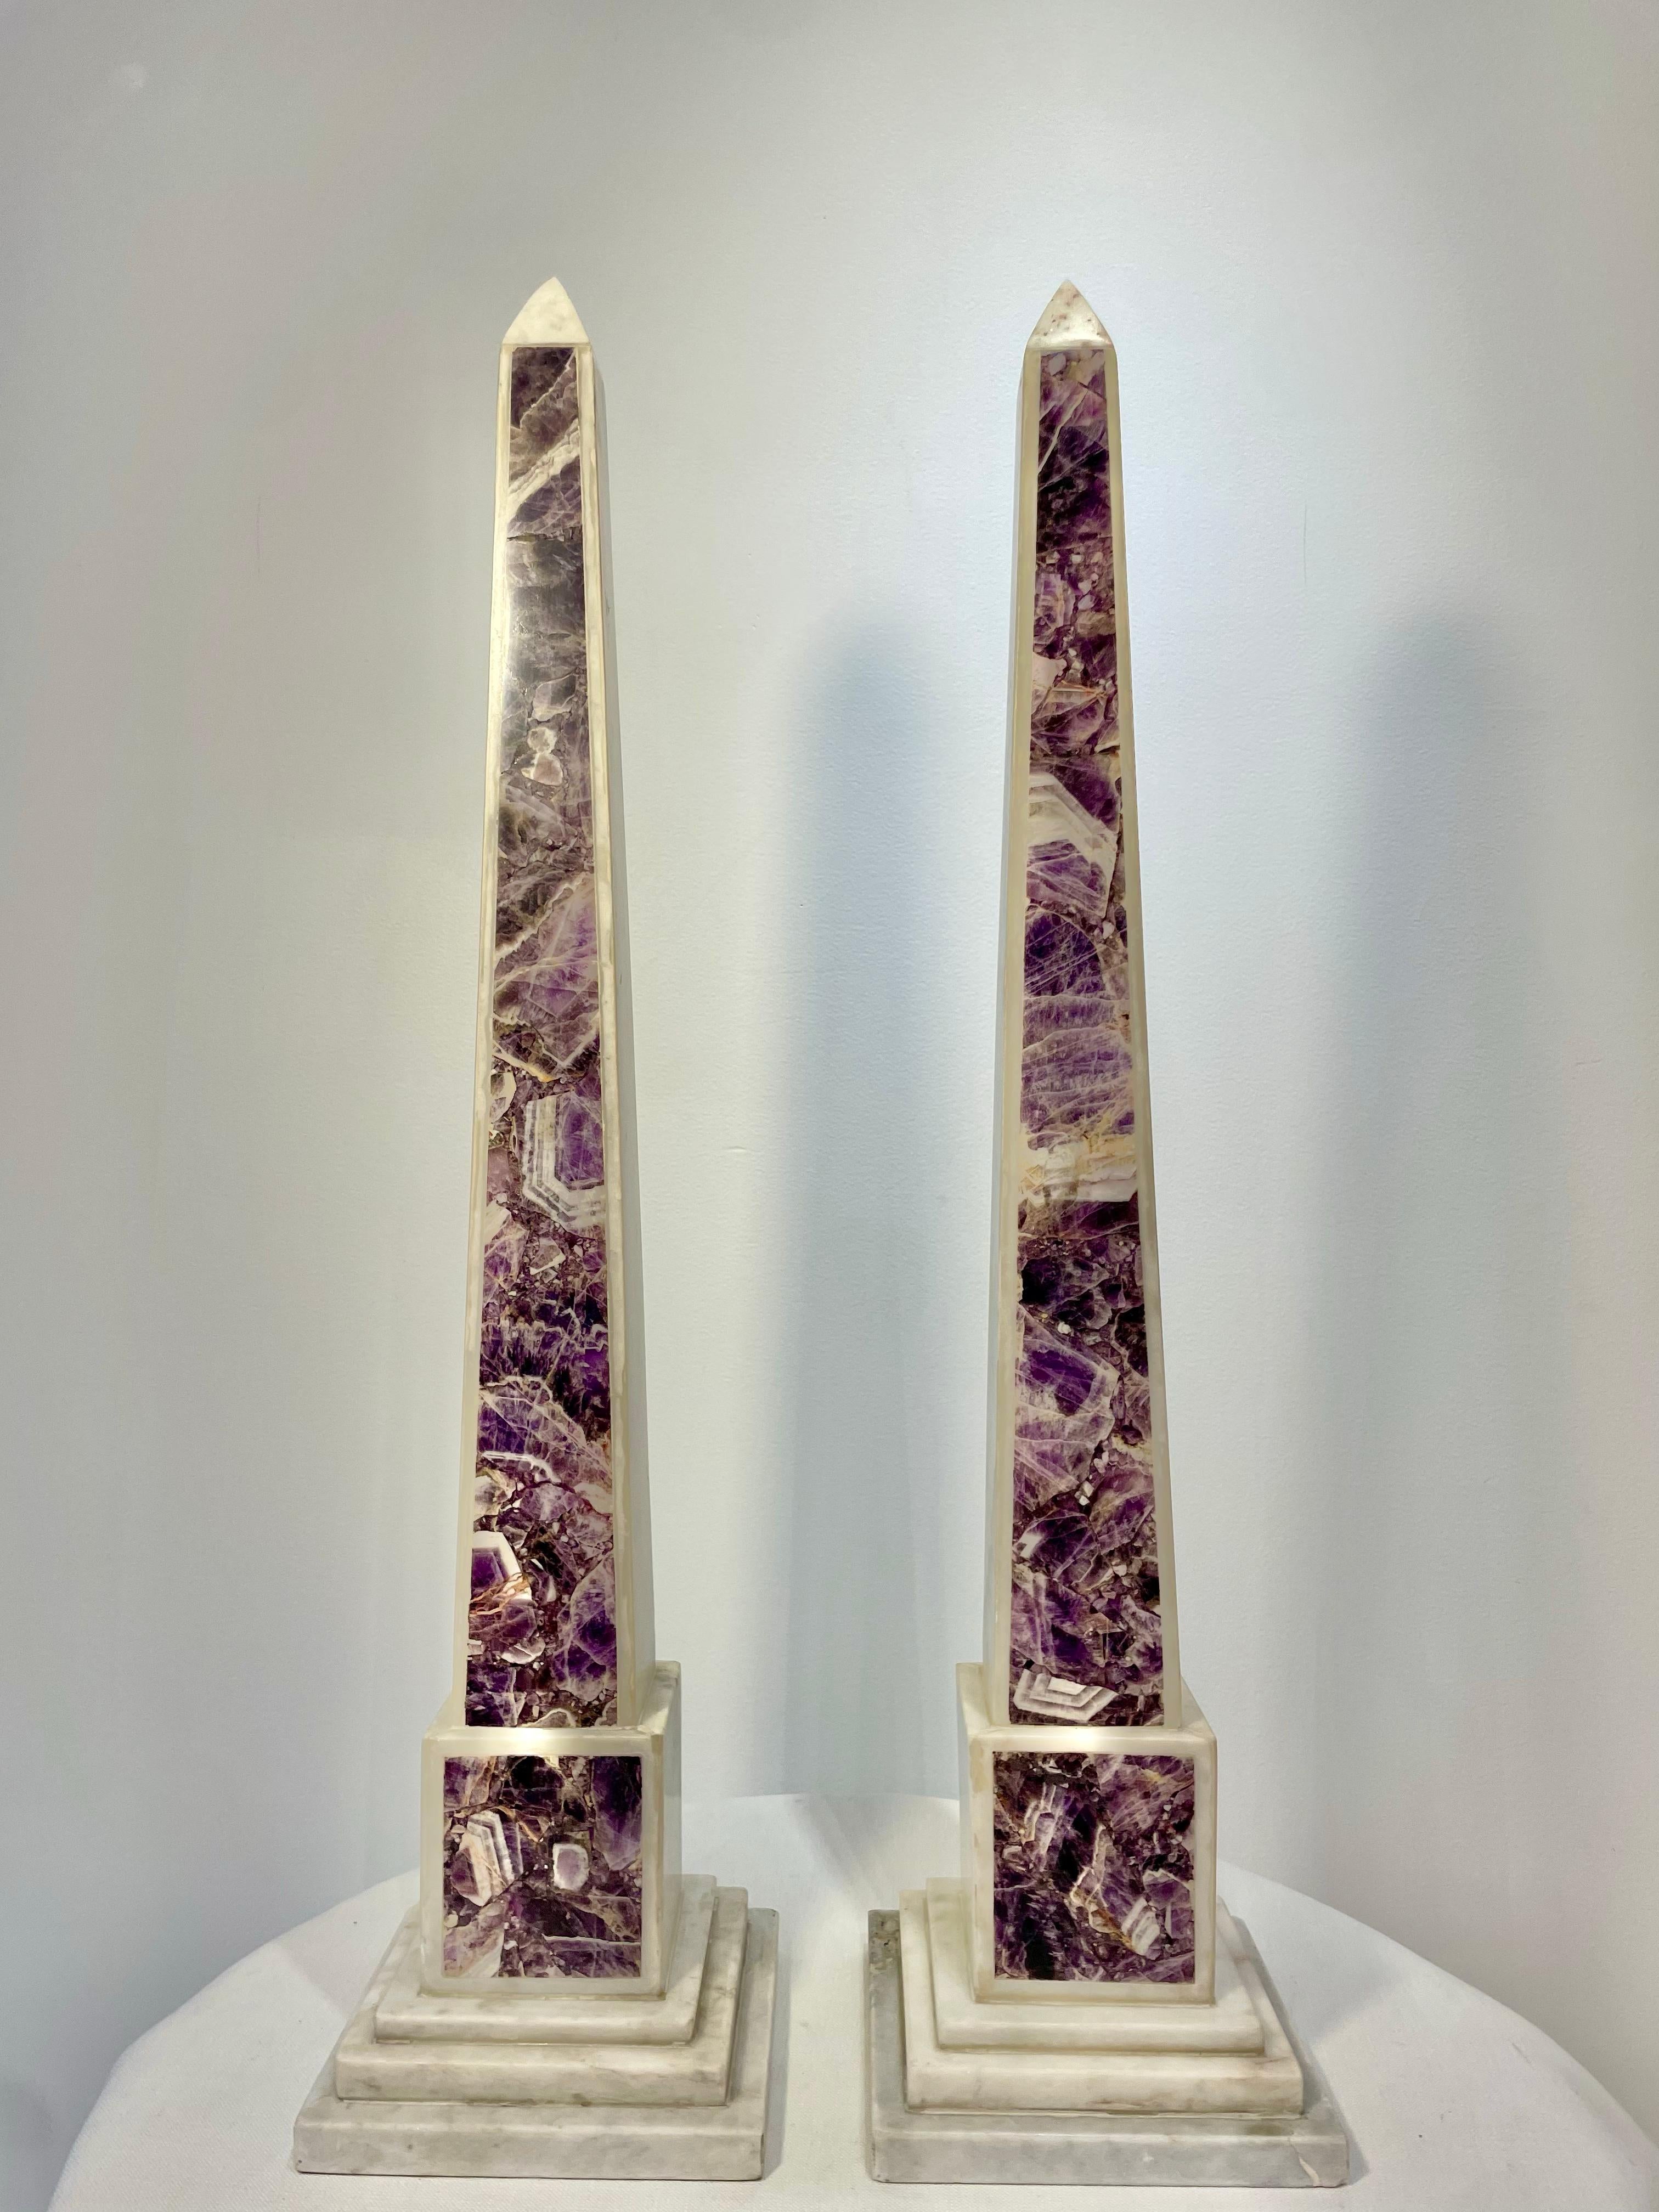 Pair of 19th-century tall and imposing white marble obelisks with the unusual addition of amethyst inlaid onto the front panels. Italian circa 1890

